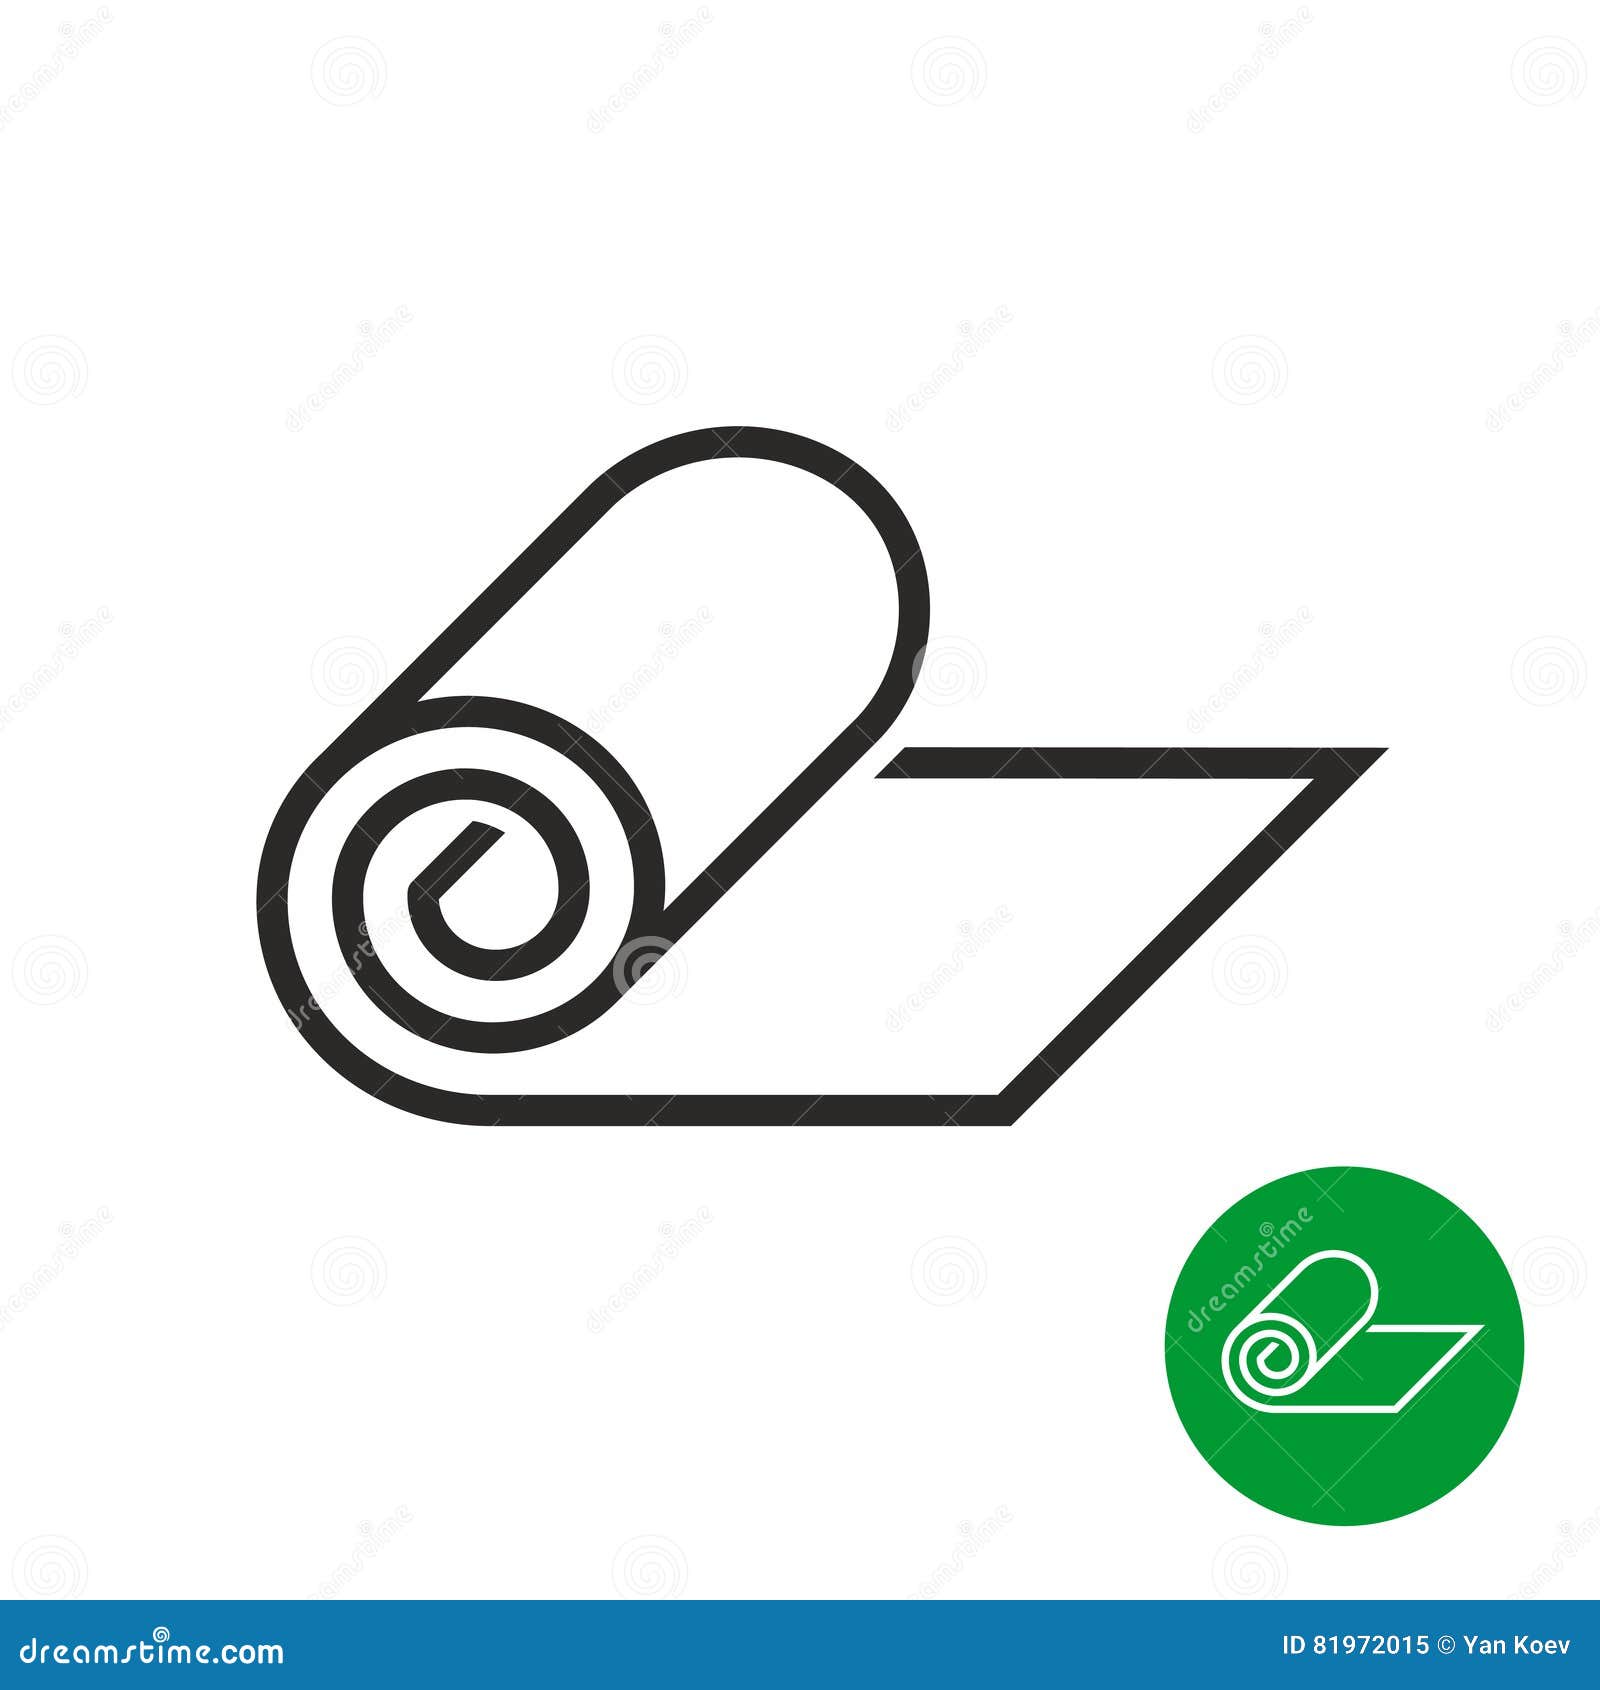 roll of camping or fitness carpet icon